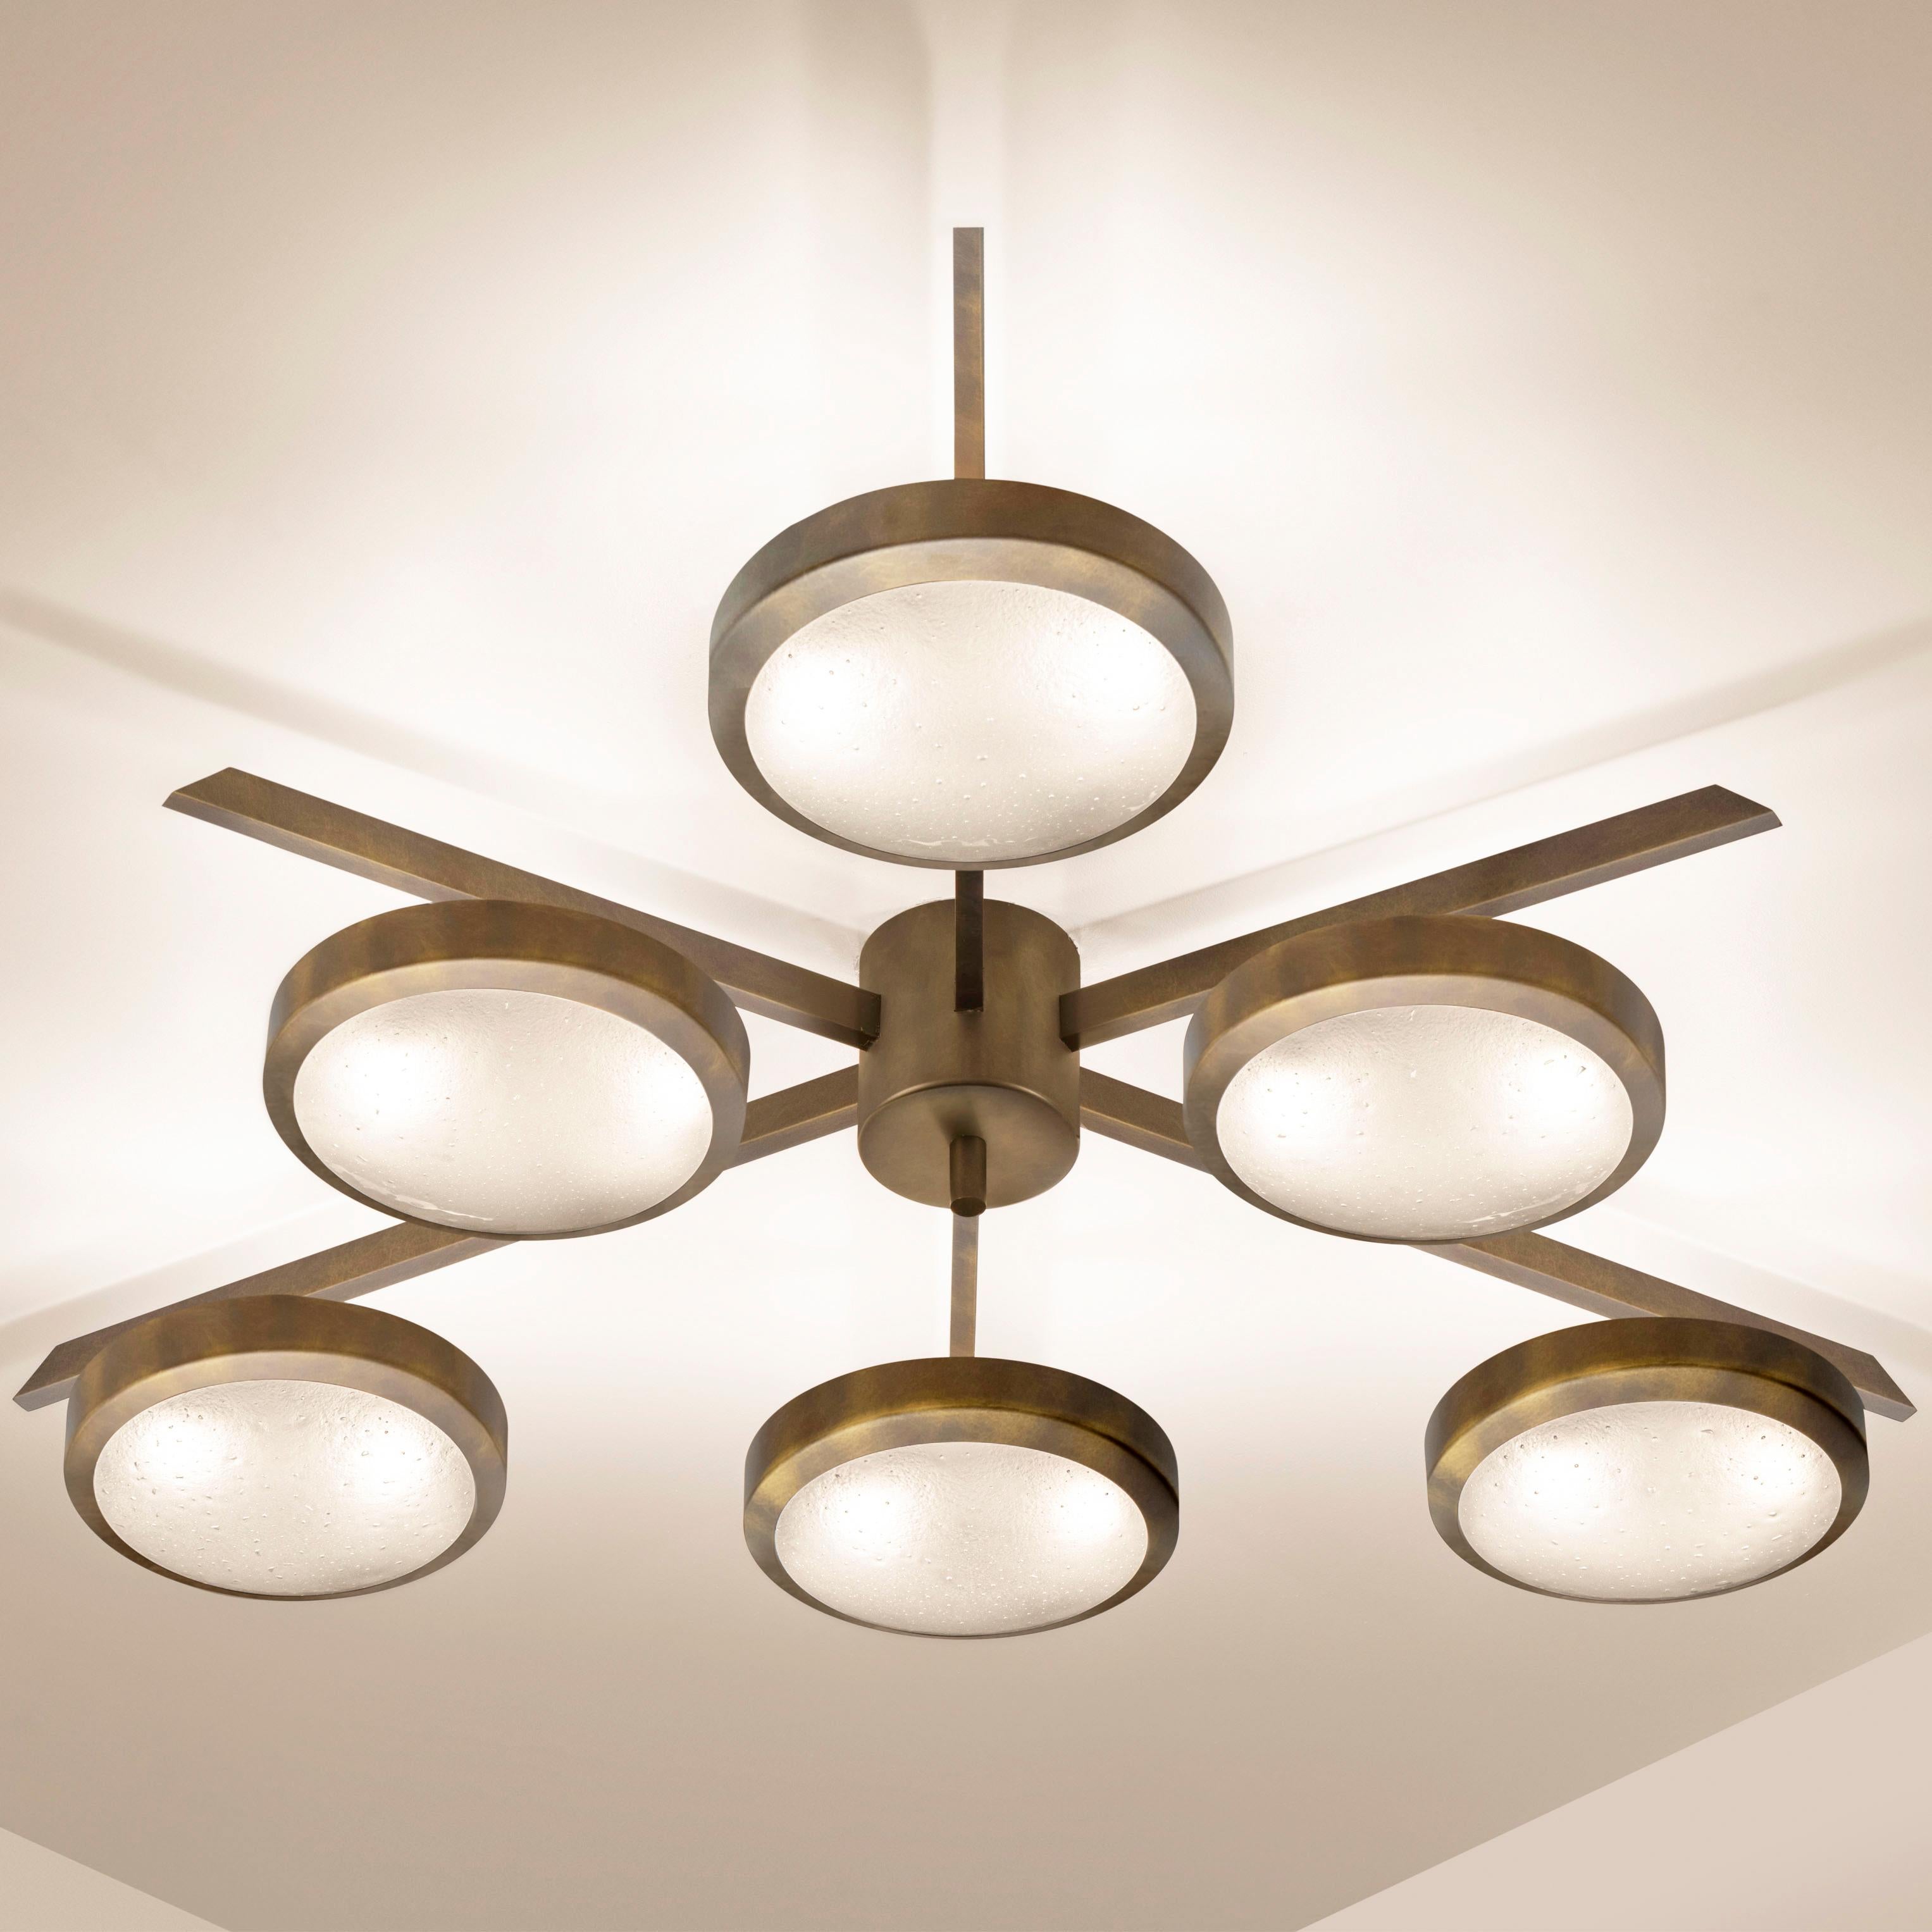 The Sei ceiling light is characterized by its star shaped frame with six suspended Murano glass shades. The first images show the fixture in our bronzo nuvolato (bronze) finish-subsequent pictures show it in a selection of alternative finishes.